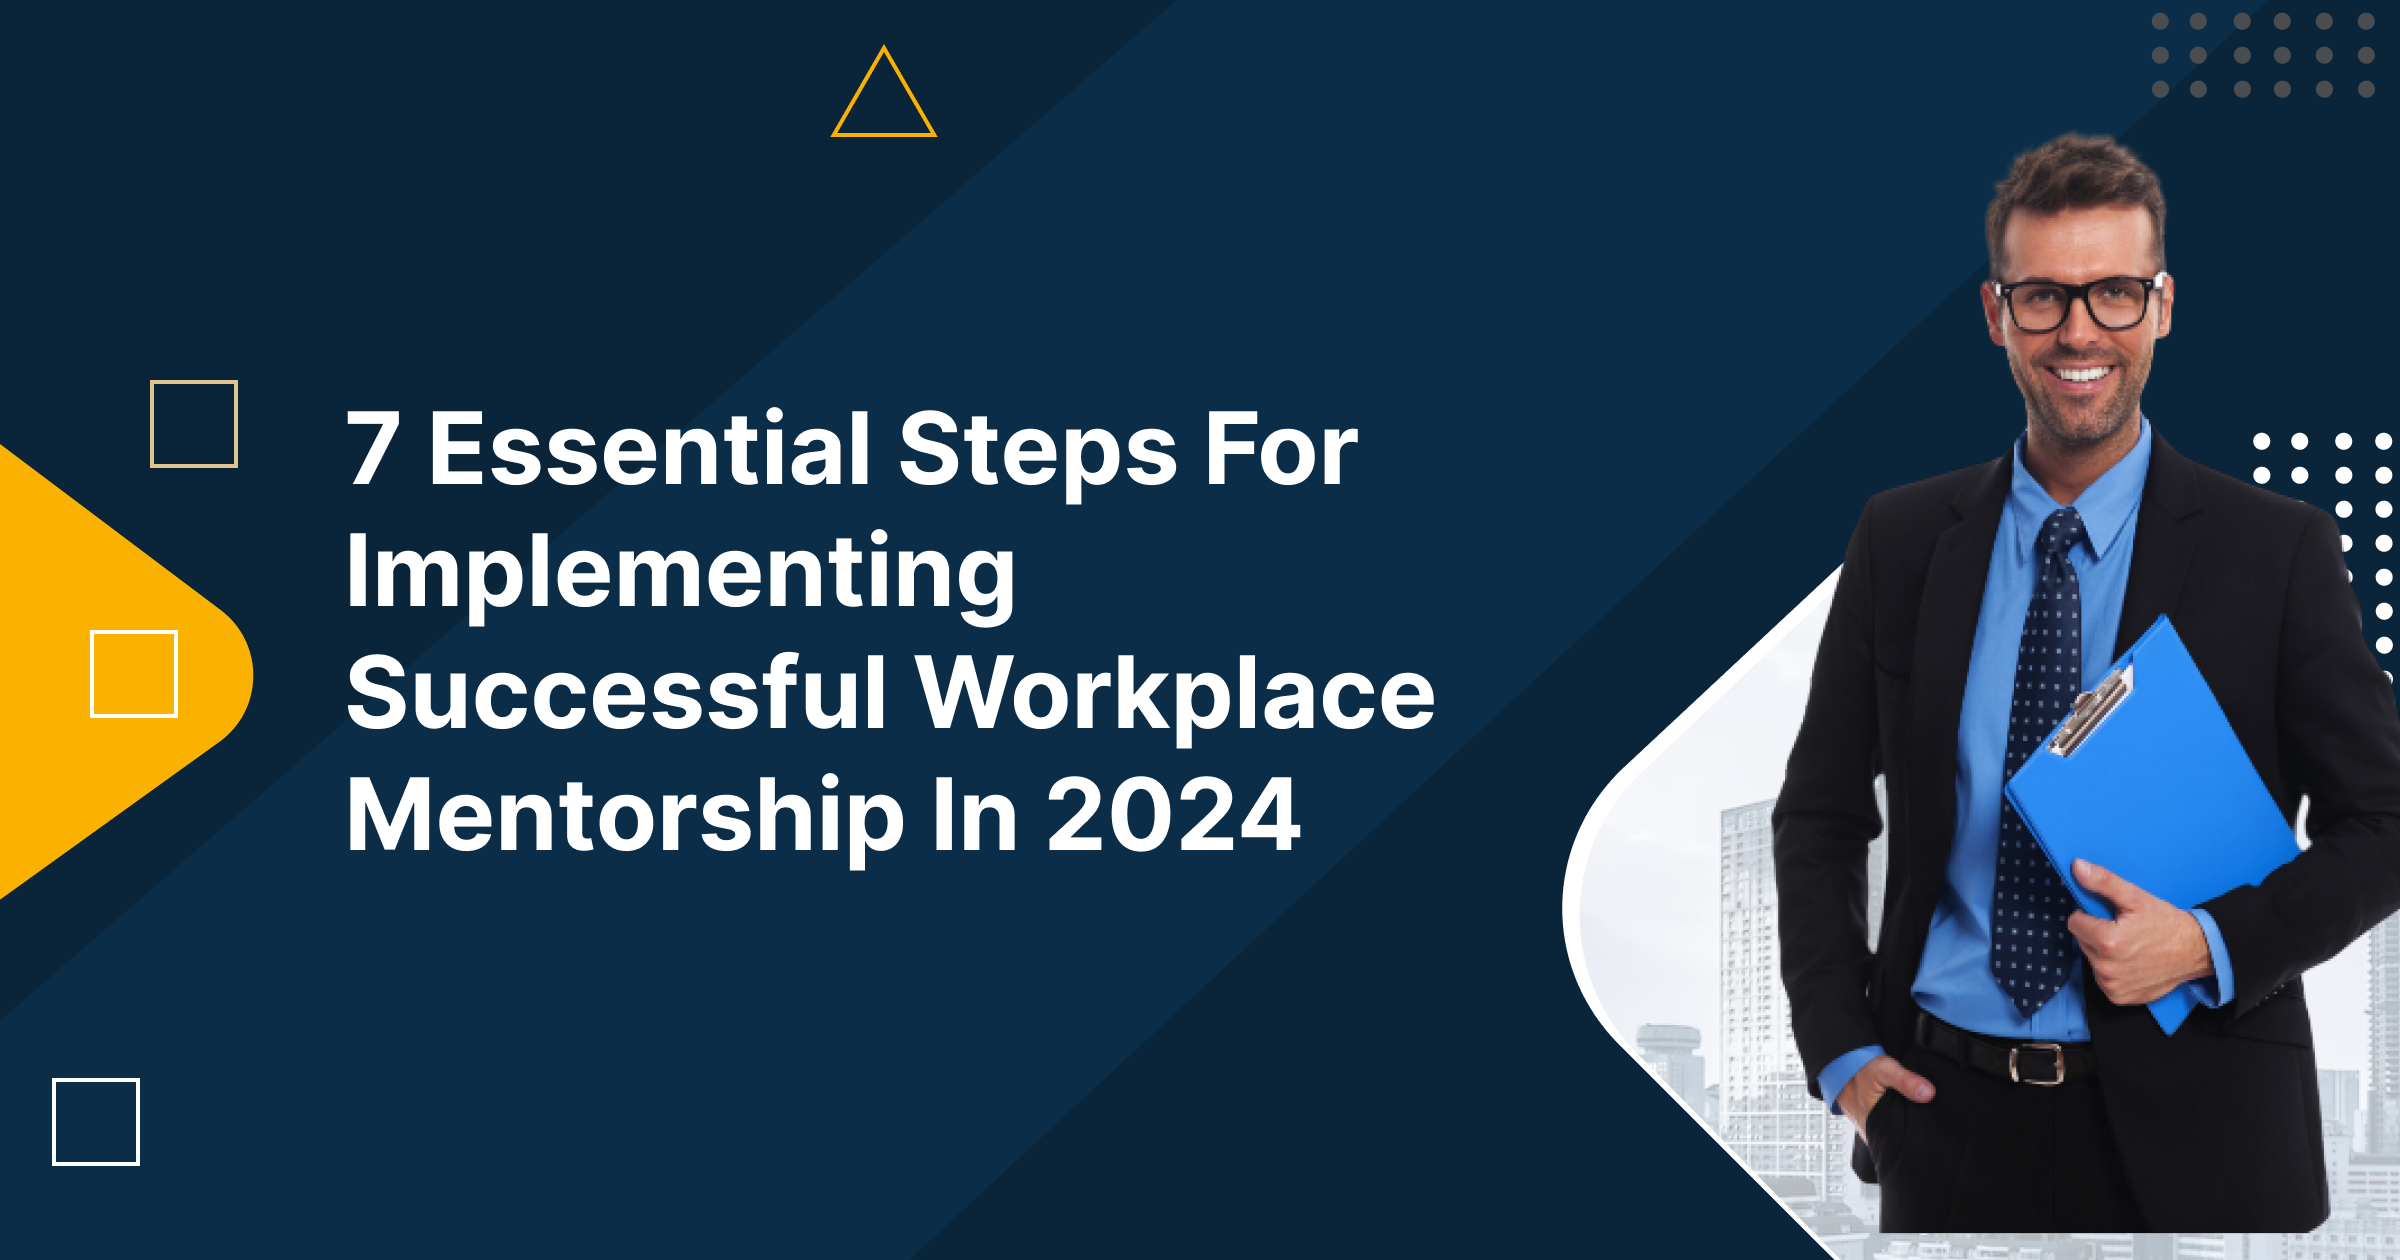 7 Essential Steps For Implementing Successful Workplace Mentorship In 2024